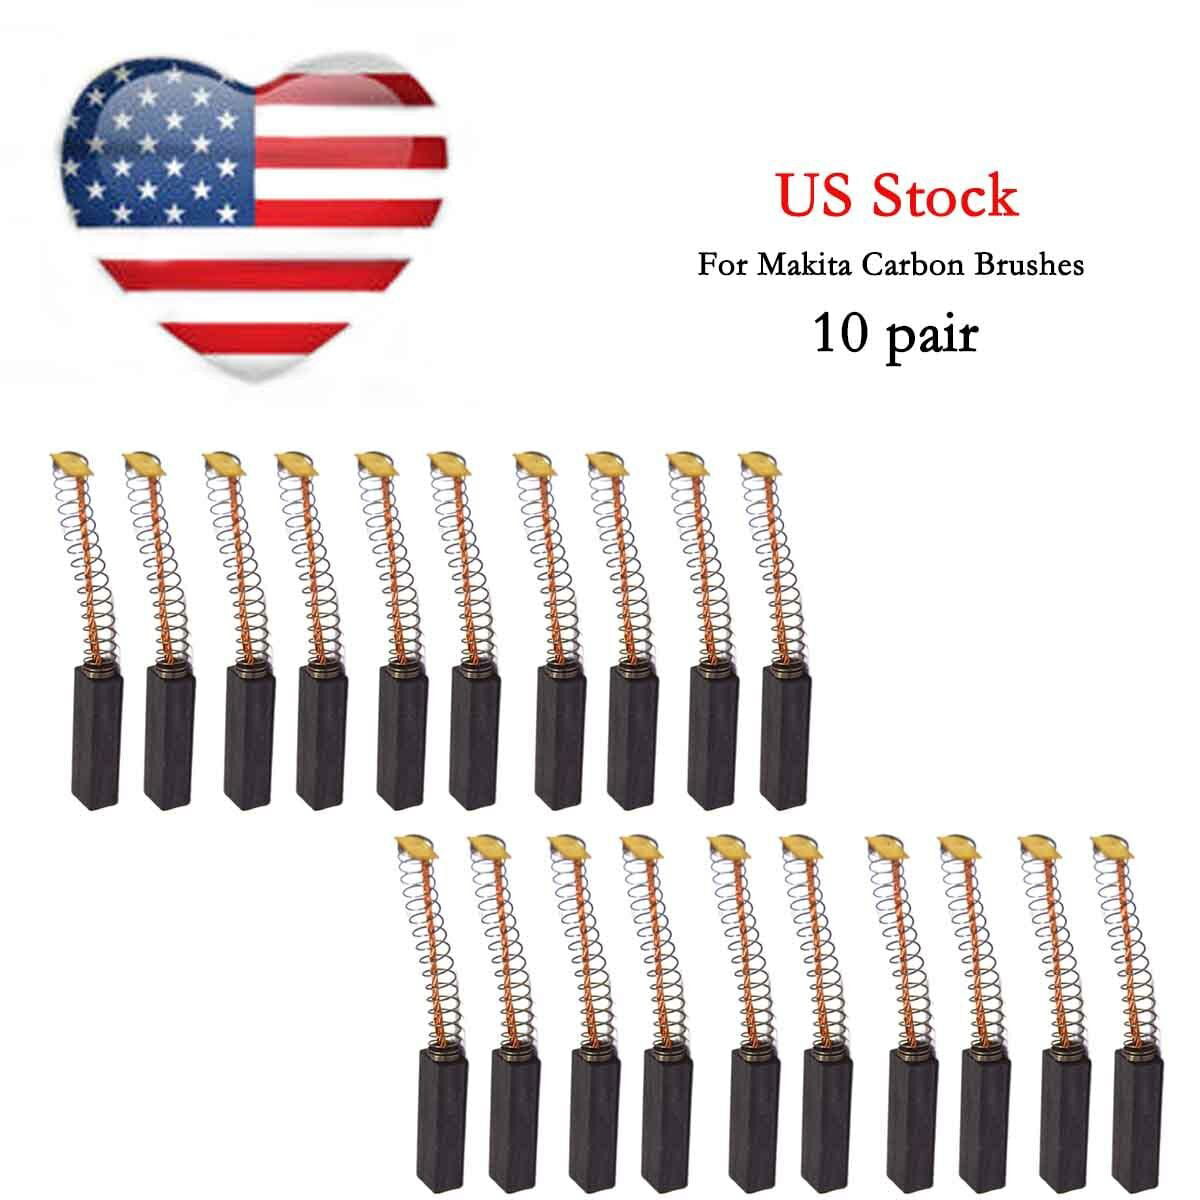 10 pair Carbon Brushes For Makita CB412 191955-1 Tool Dust Collector US 